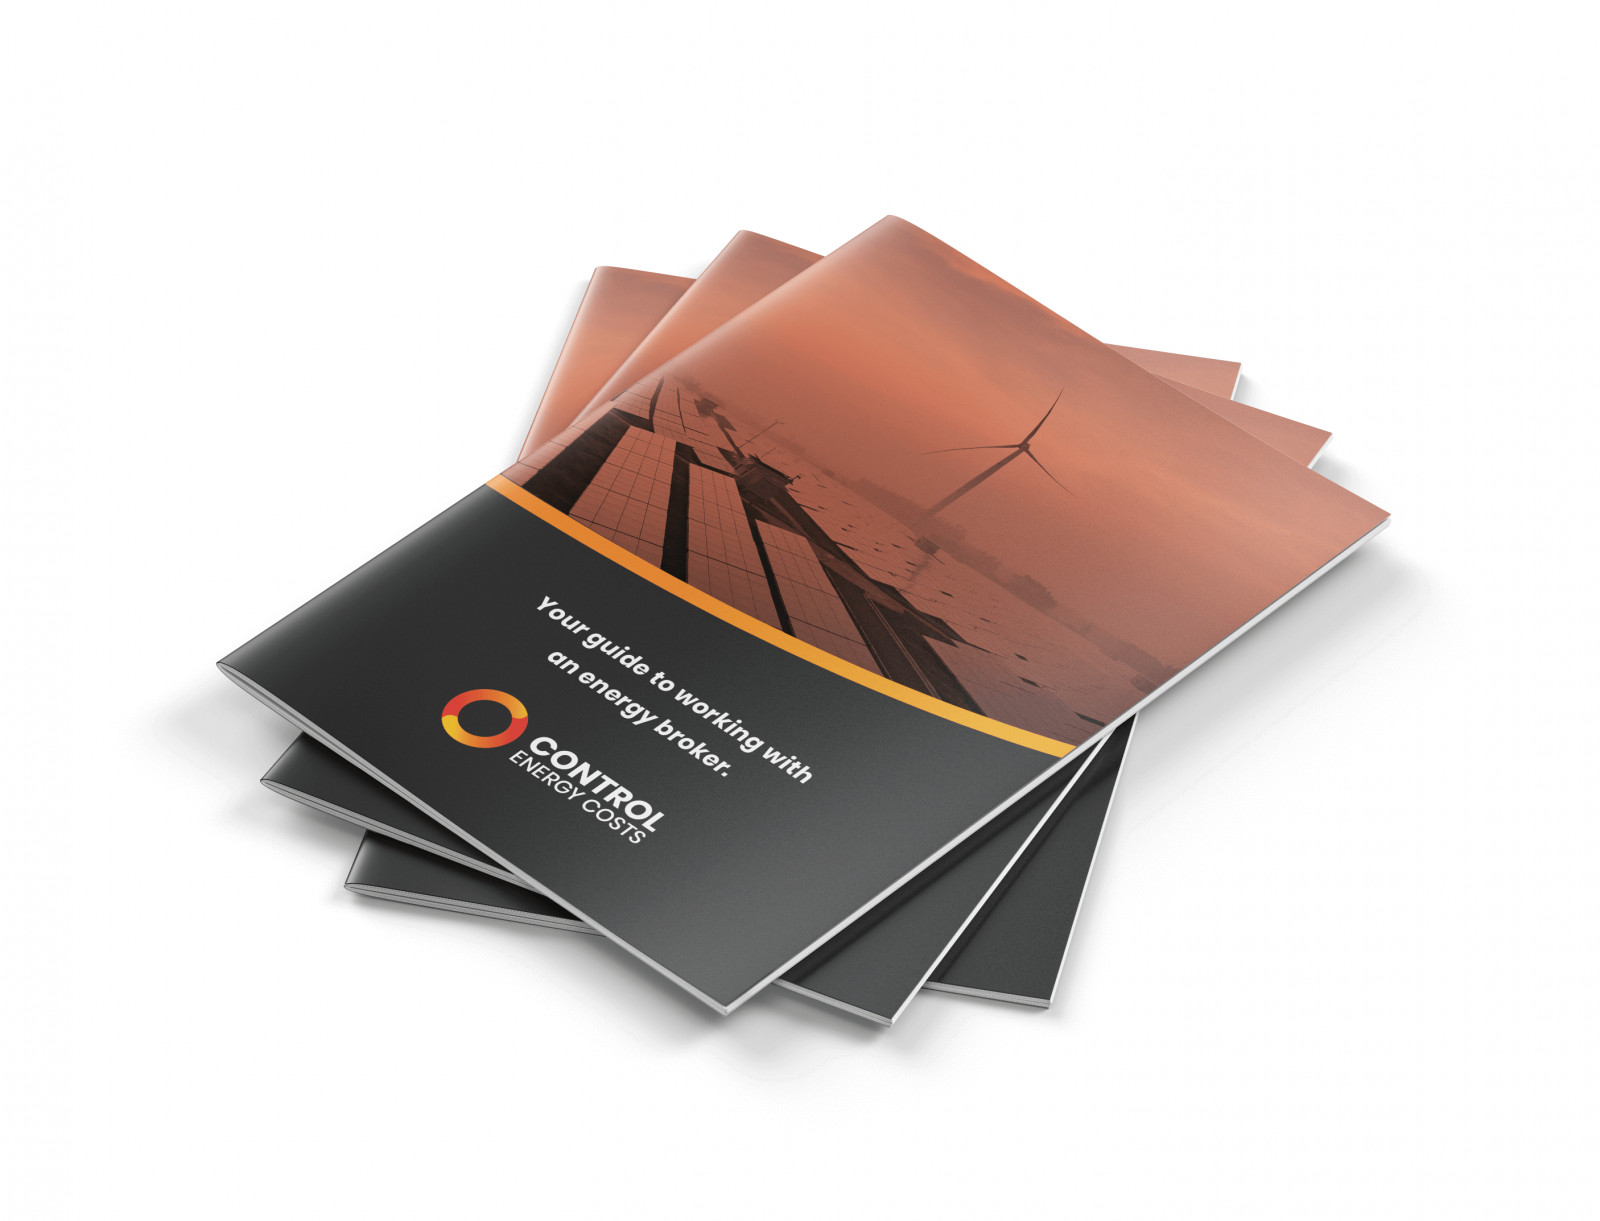 New eBook launched - a guide to working with an energy broker